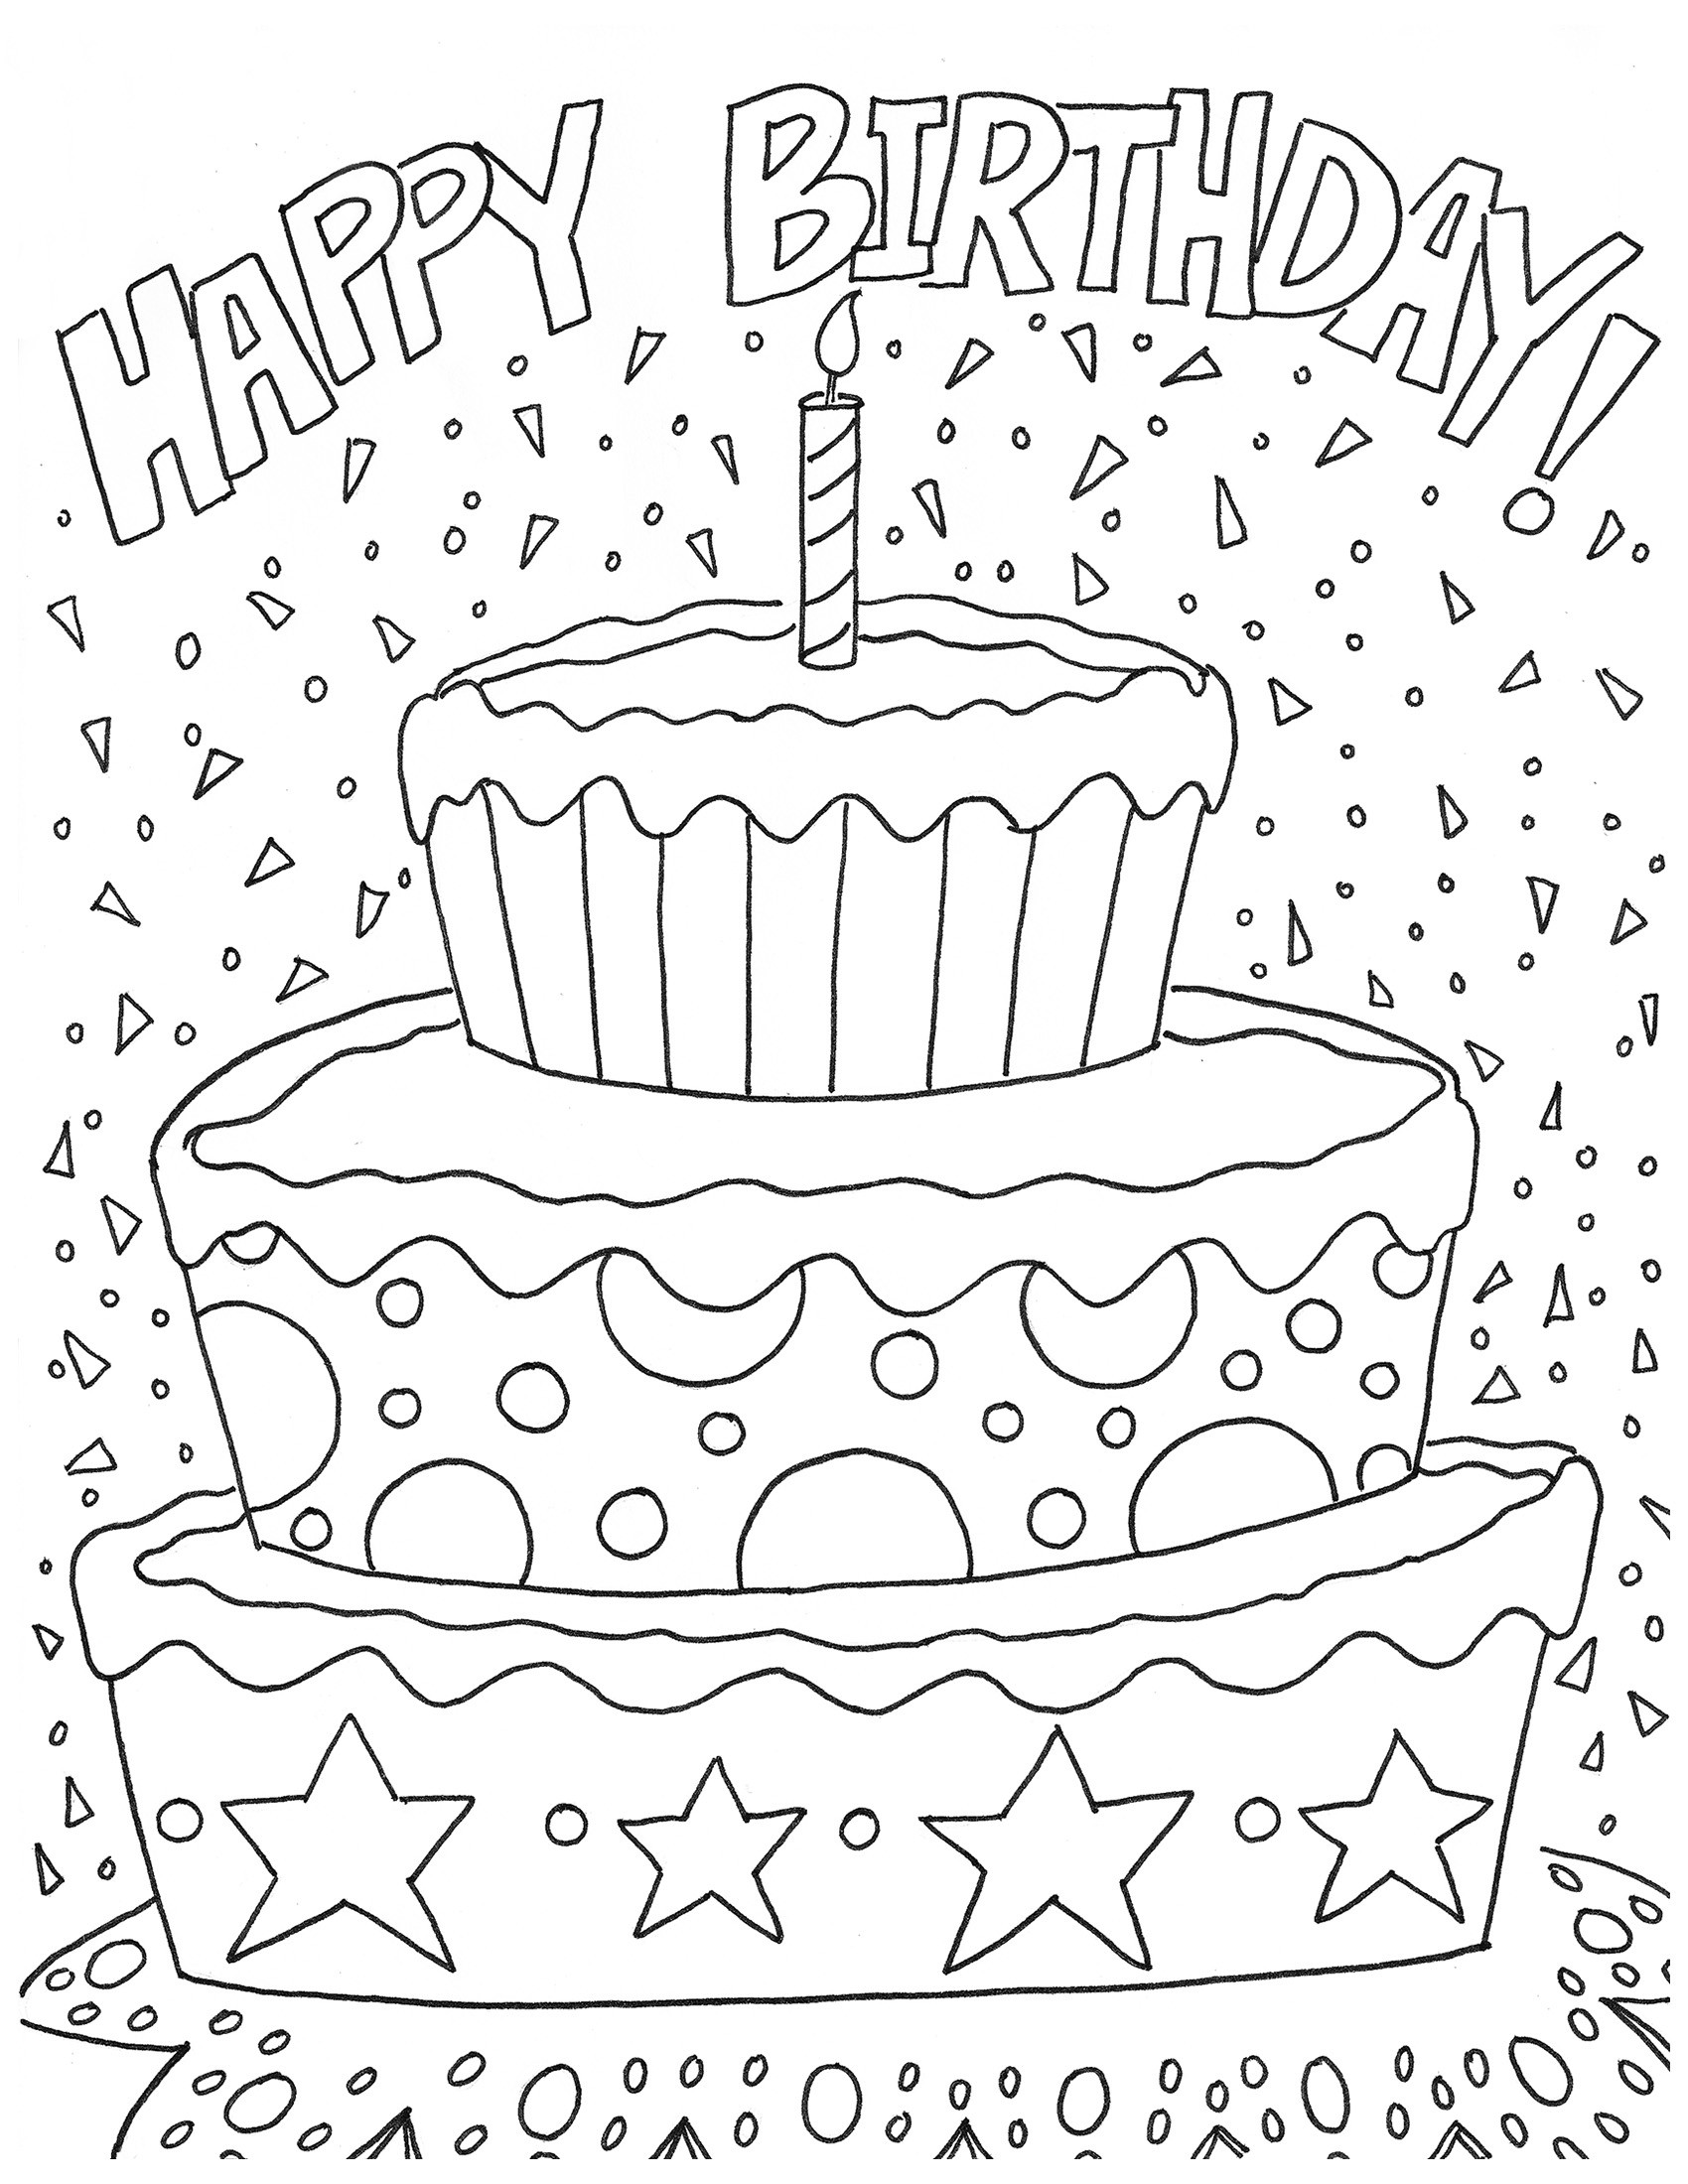 Free Printable Happy Birthday Coloring Pages
 Free Happy Birthday Coloring Page and Hershey